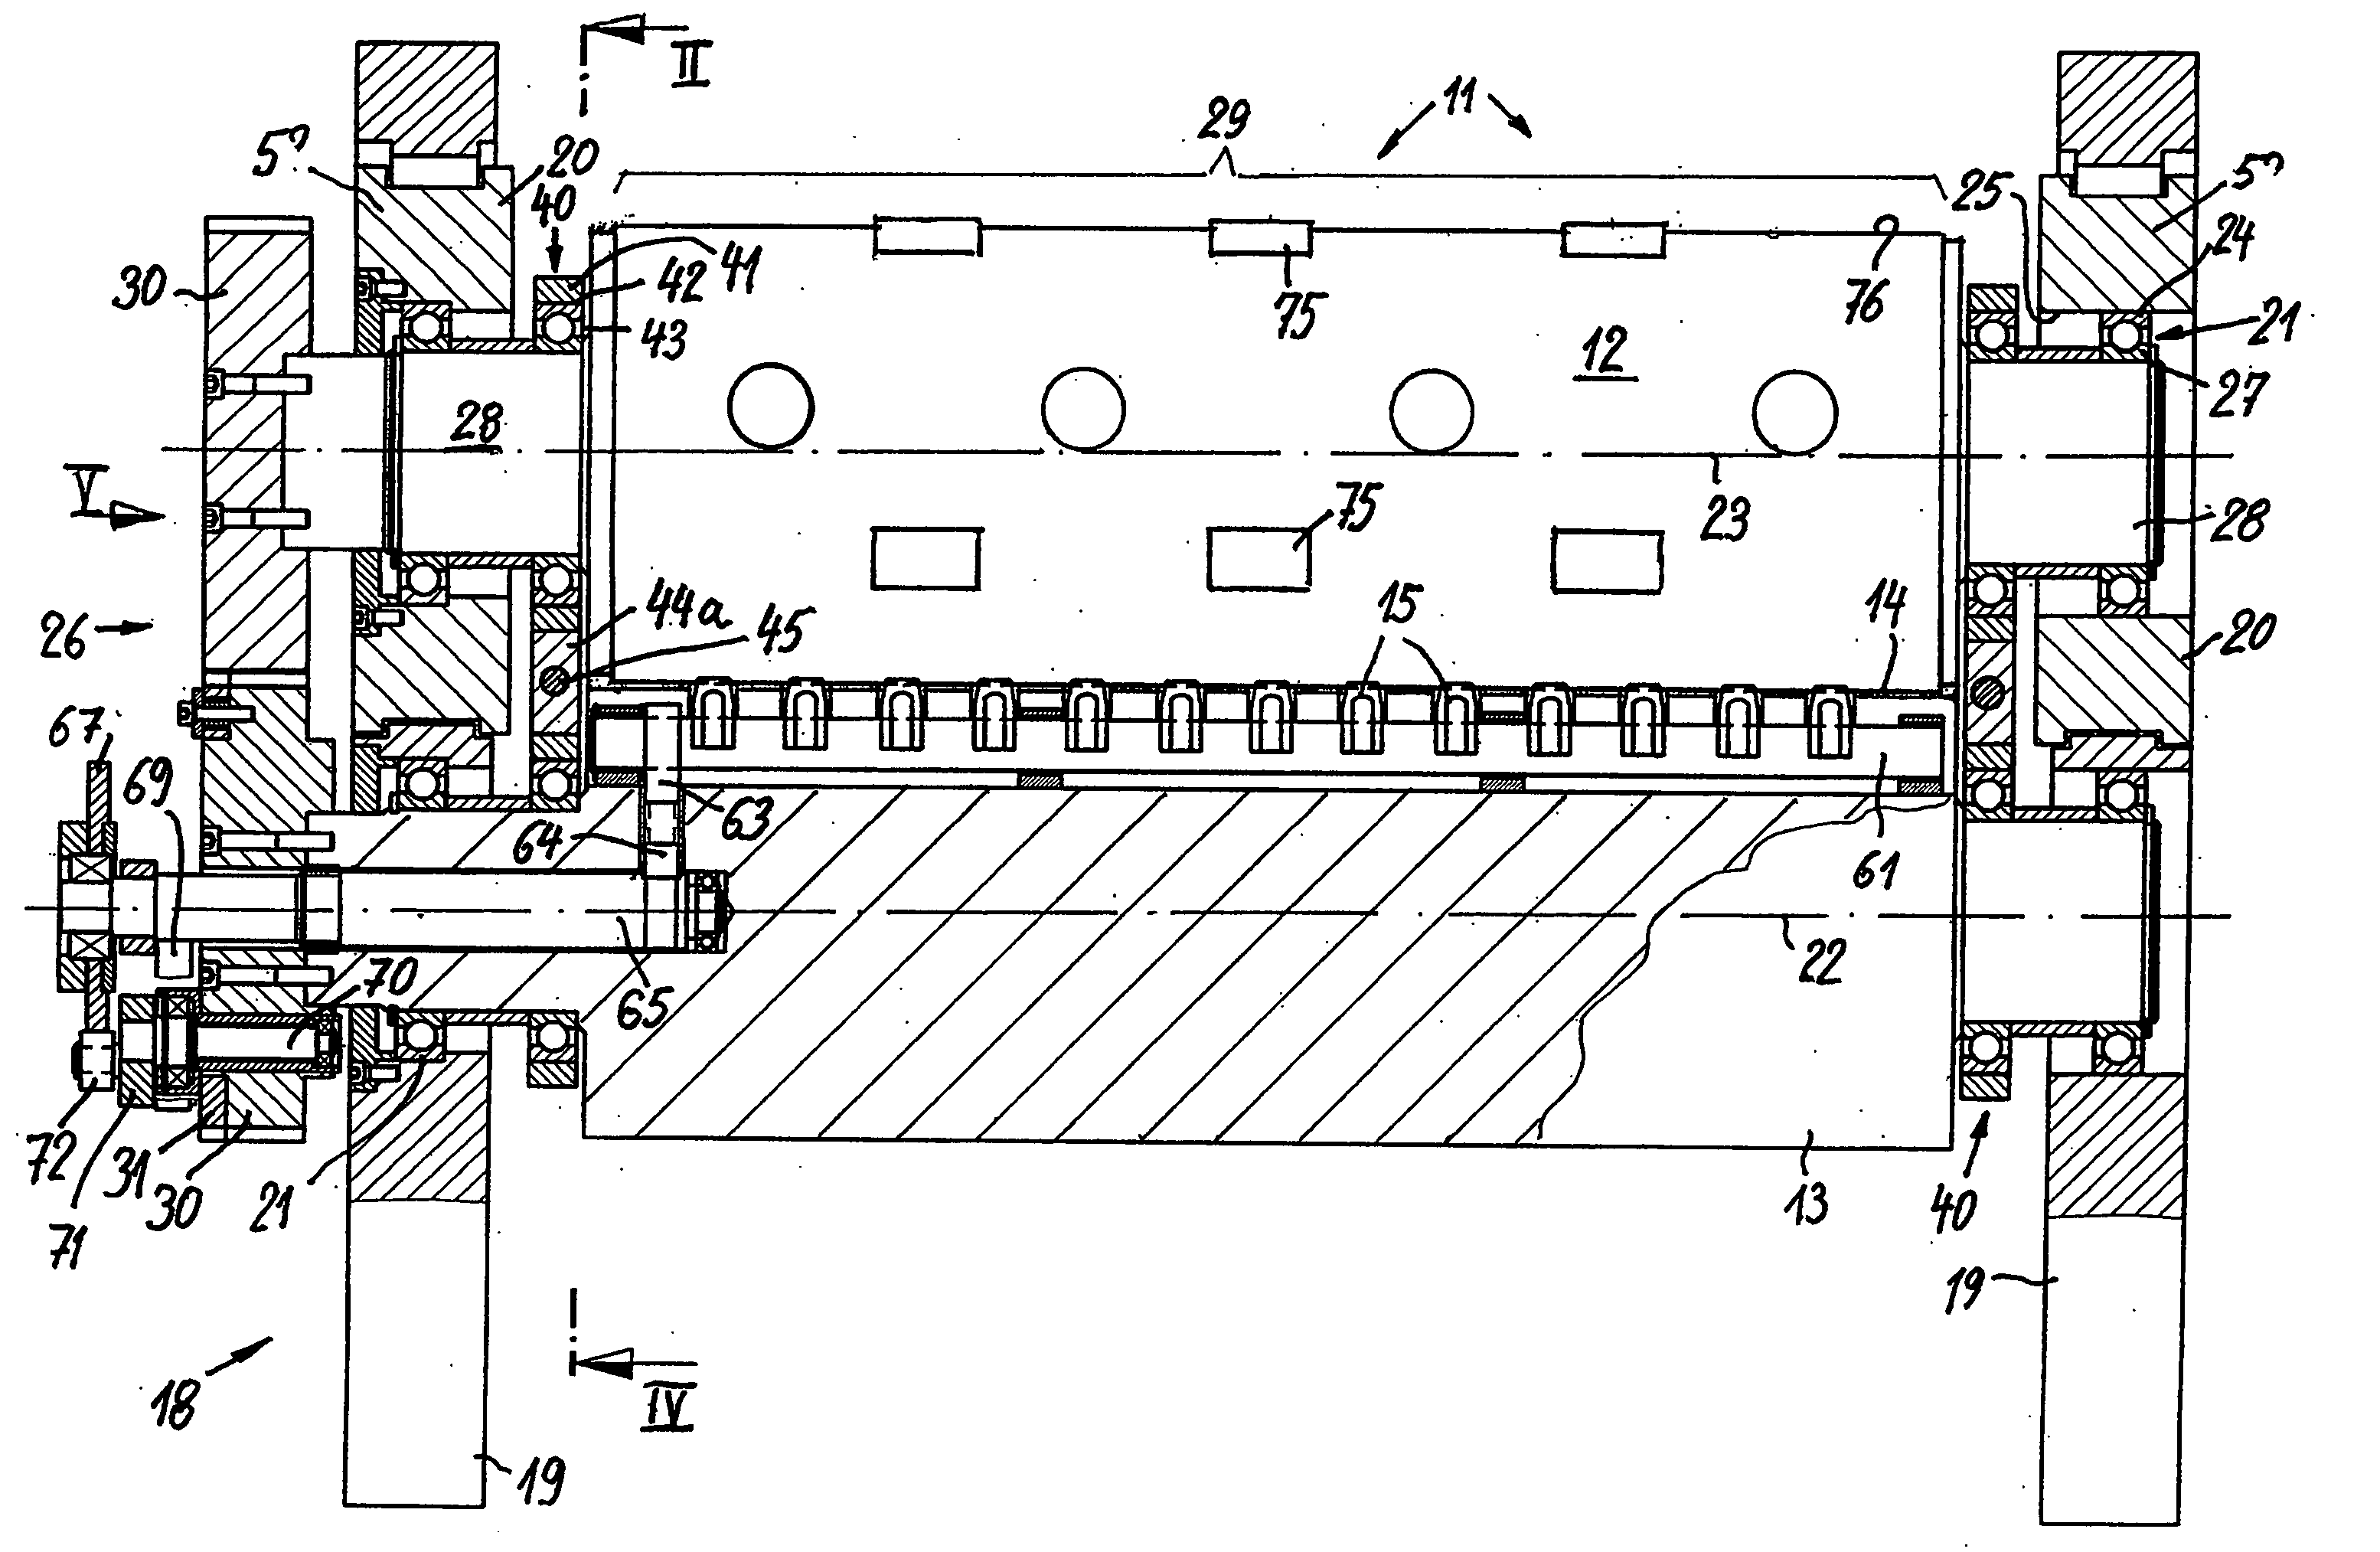 Hot foil stamping or printing device for transferring surface portions onto a flat material